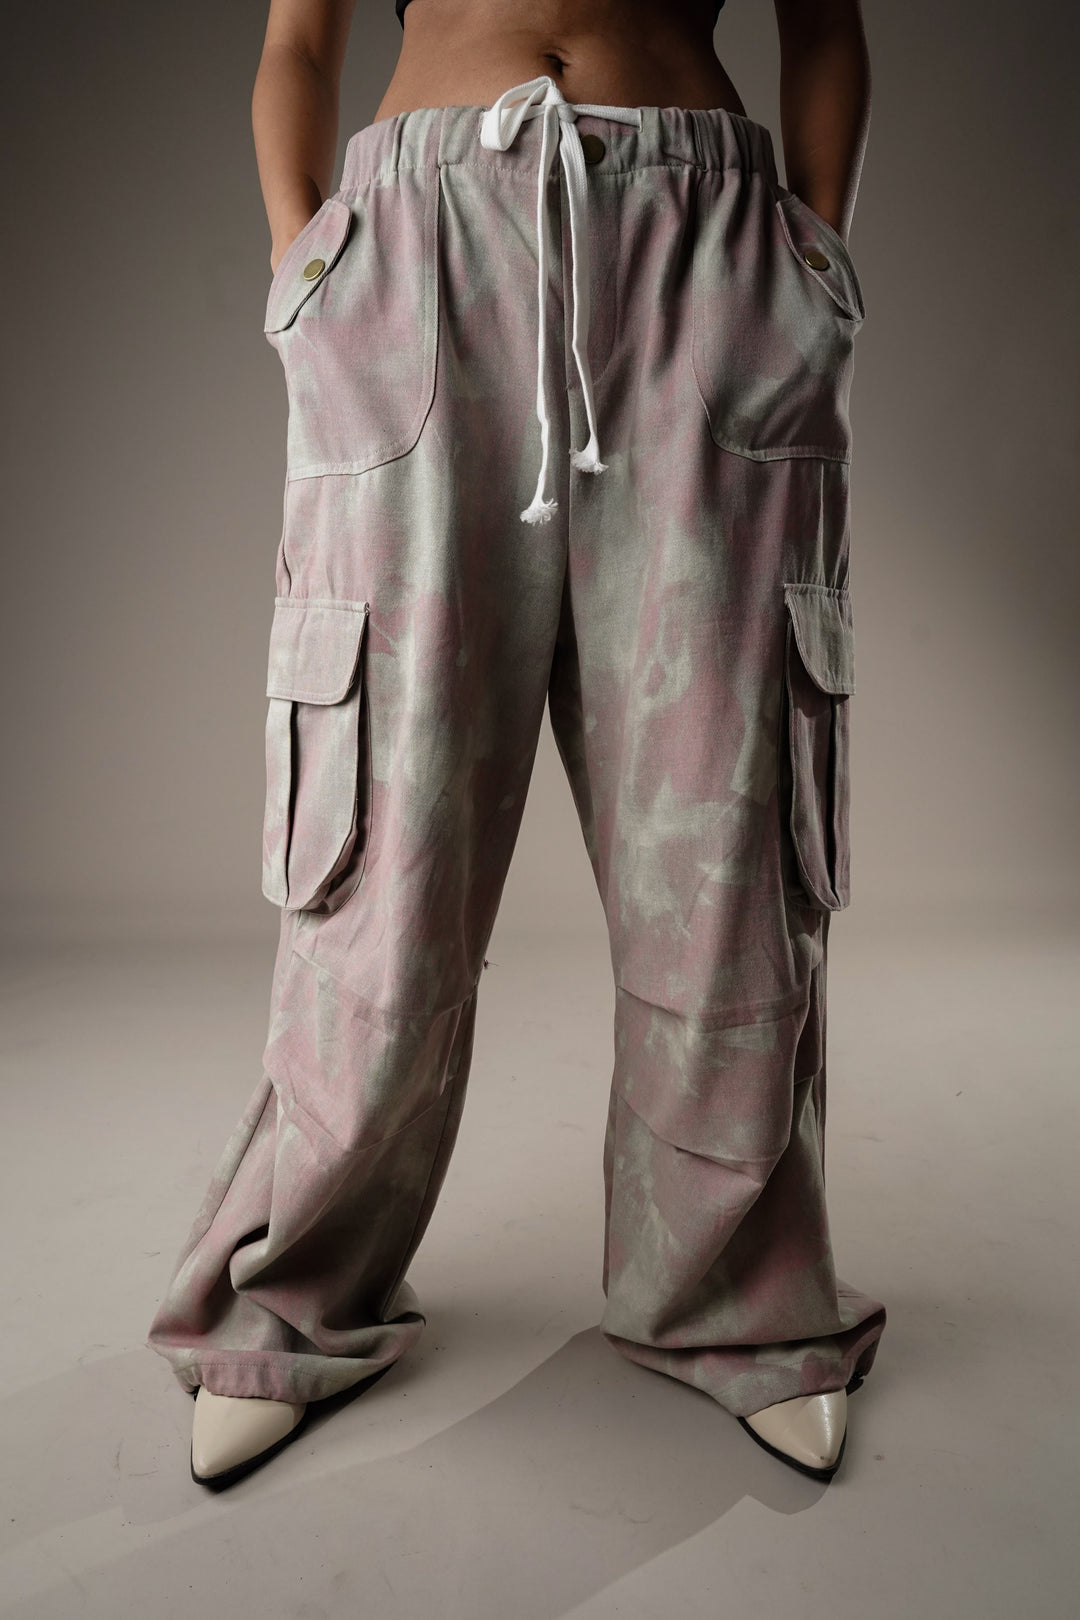 Pink and grey cargo pants for street style fashion